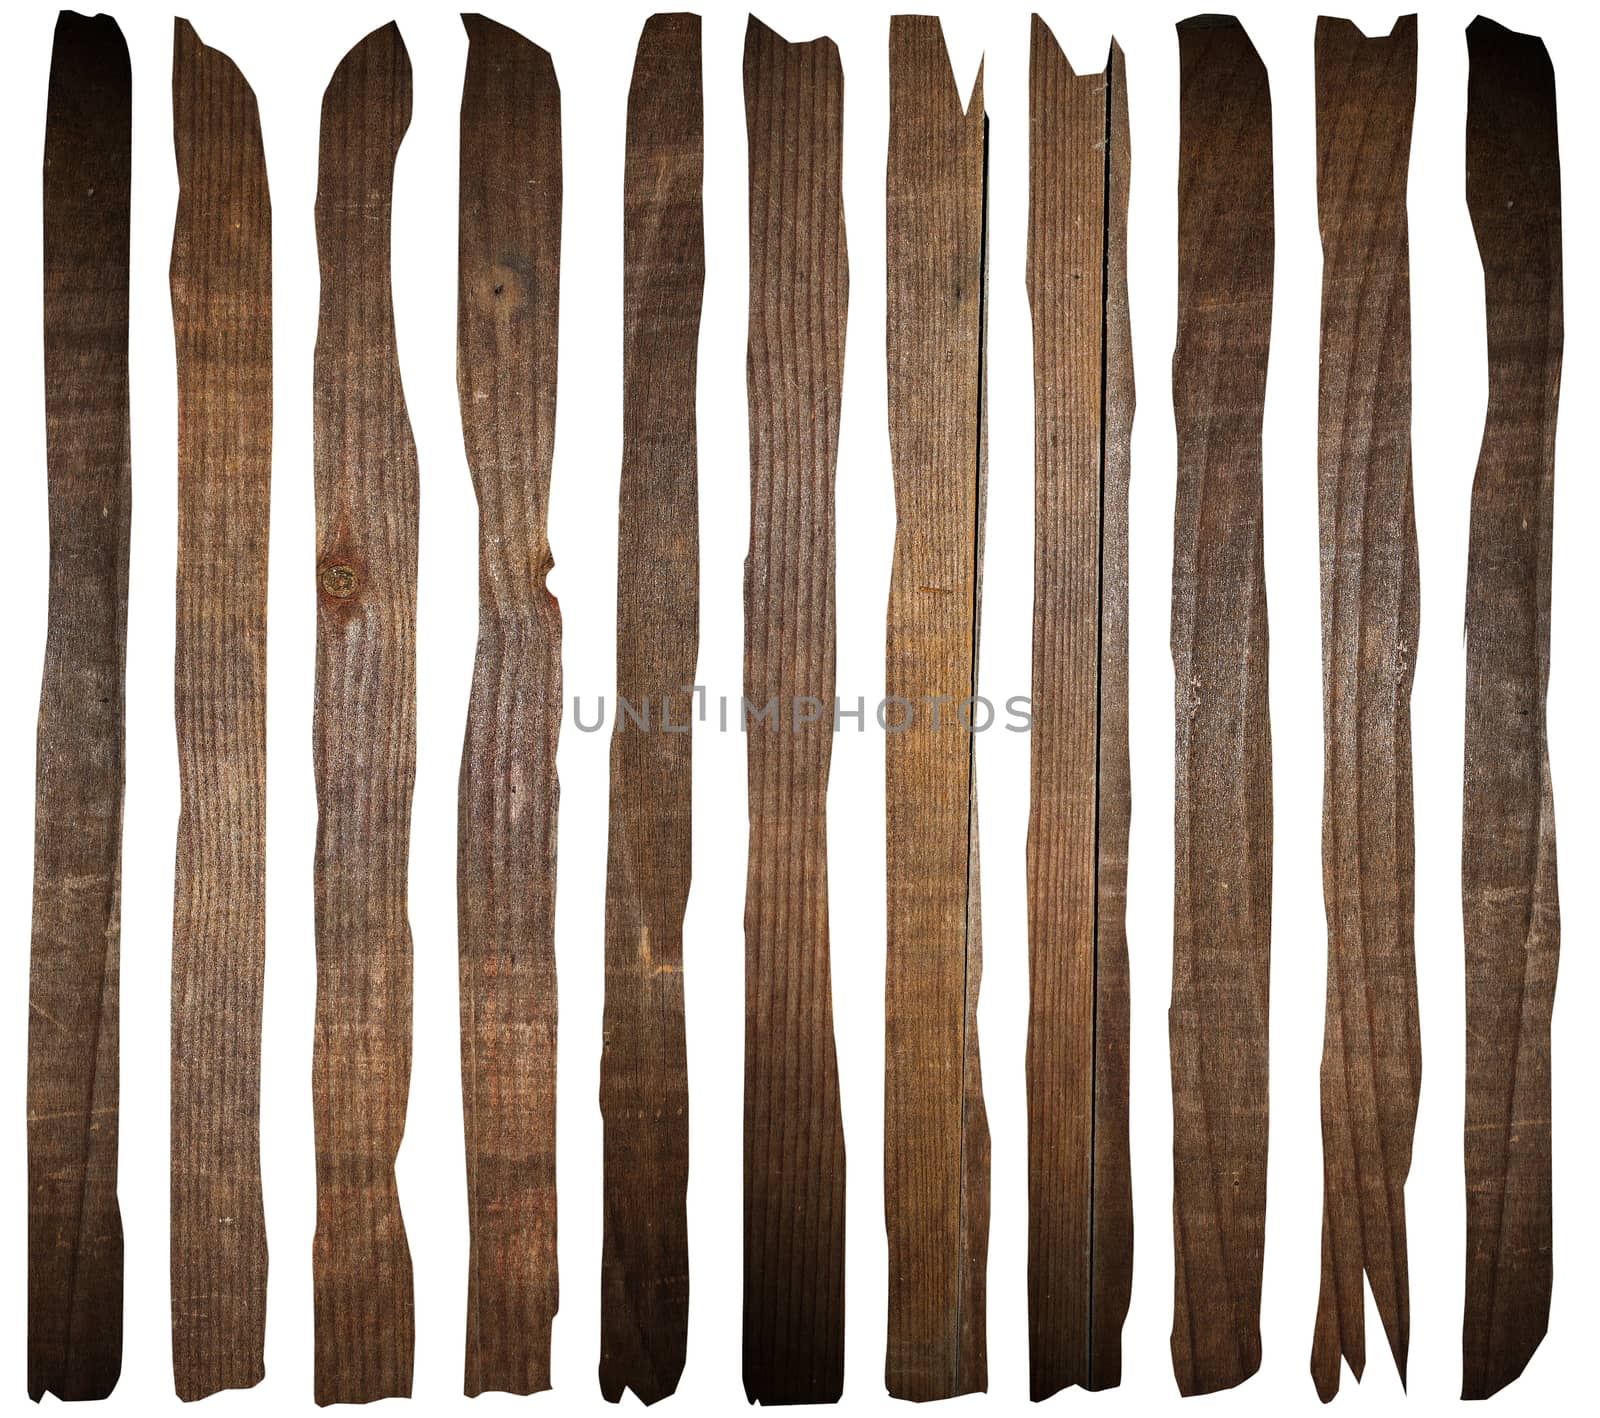 brown ancient wooden boards isolated over white background